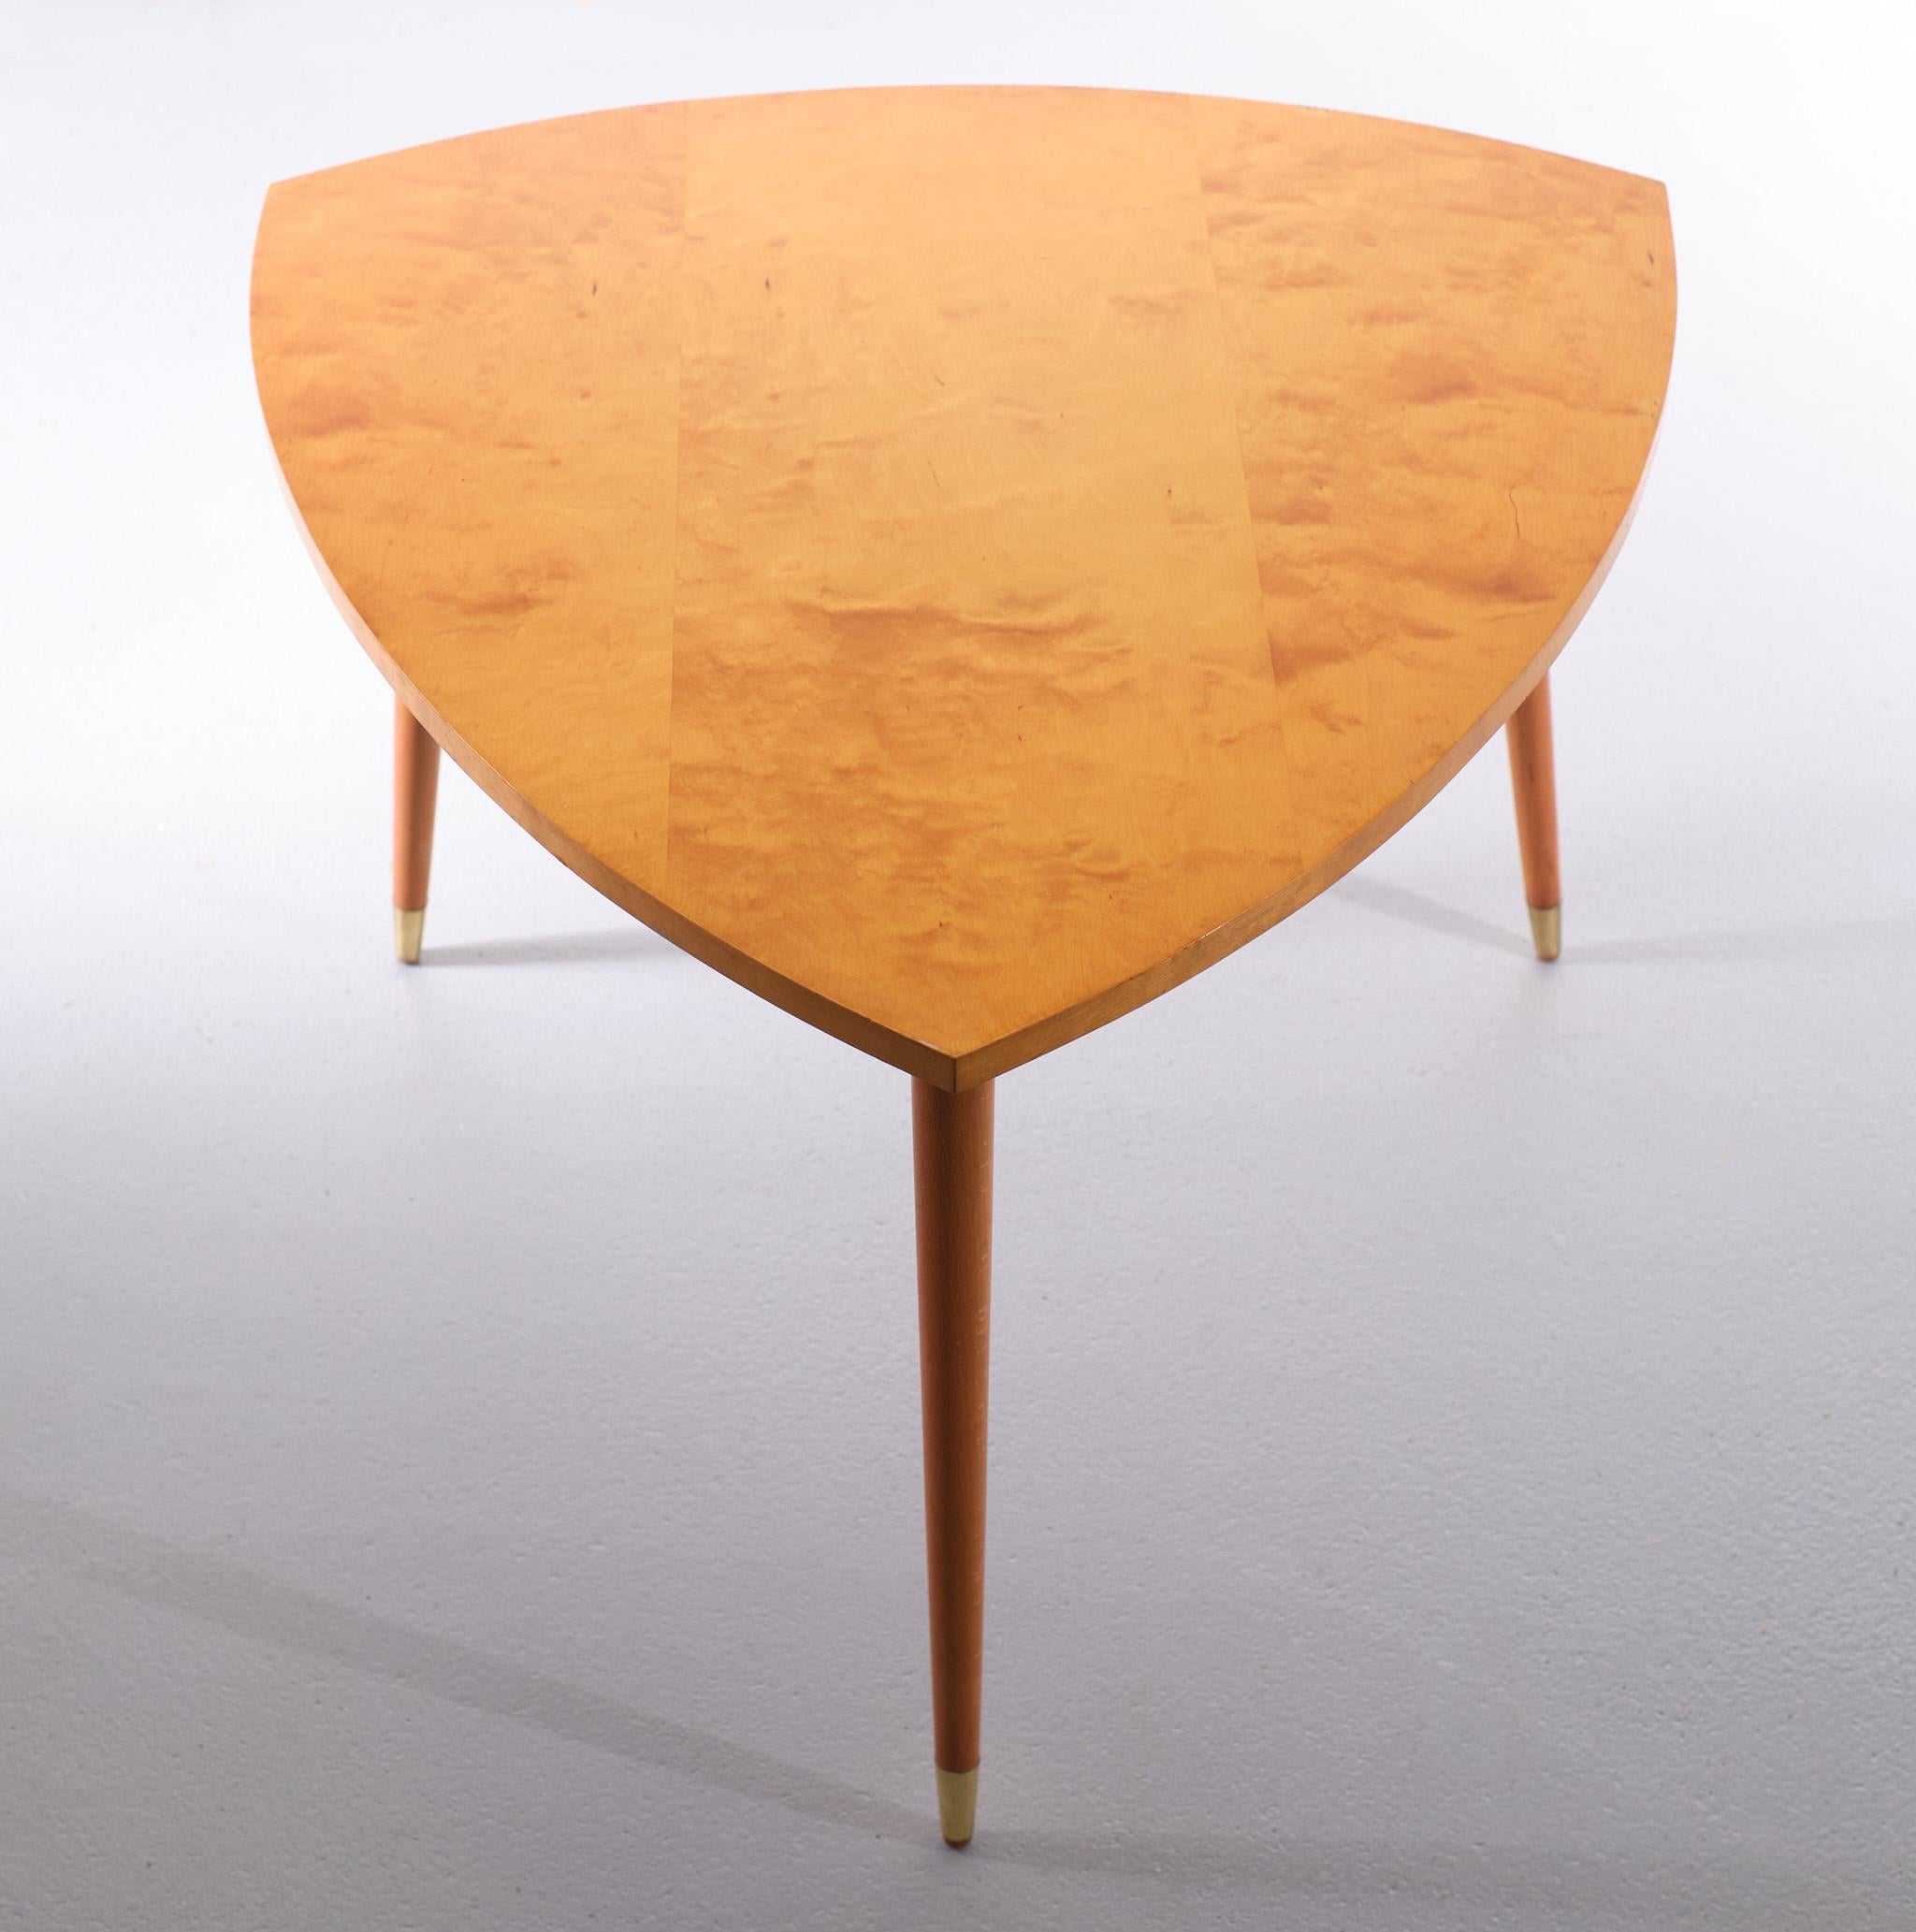 Mid-20th Century Maple wood Triangle Coffee table 1950s Holland  For Sale